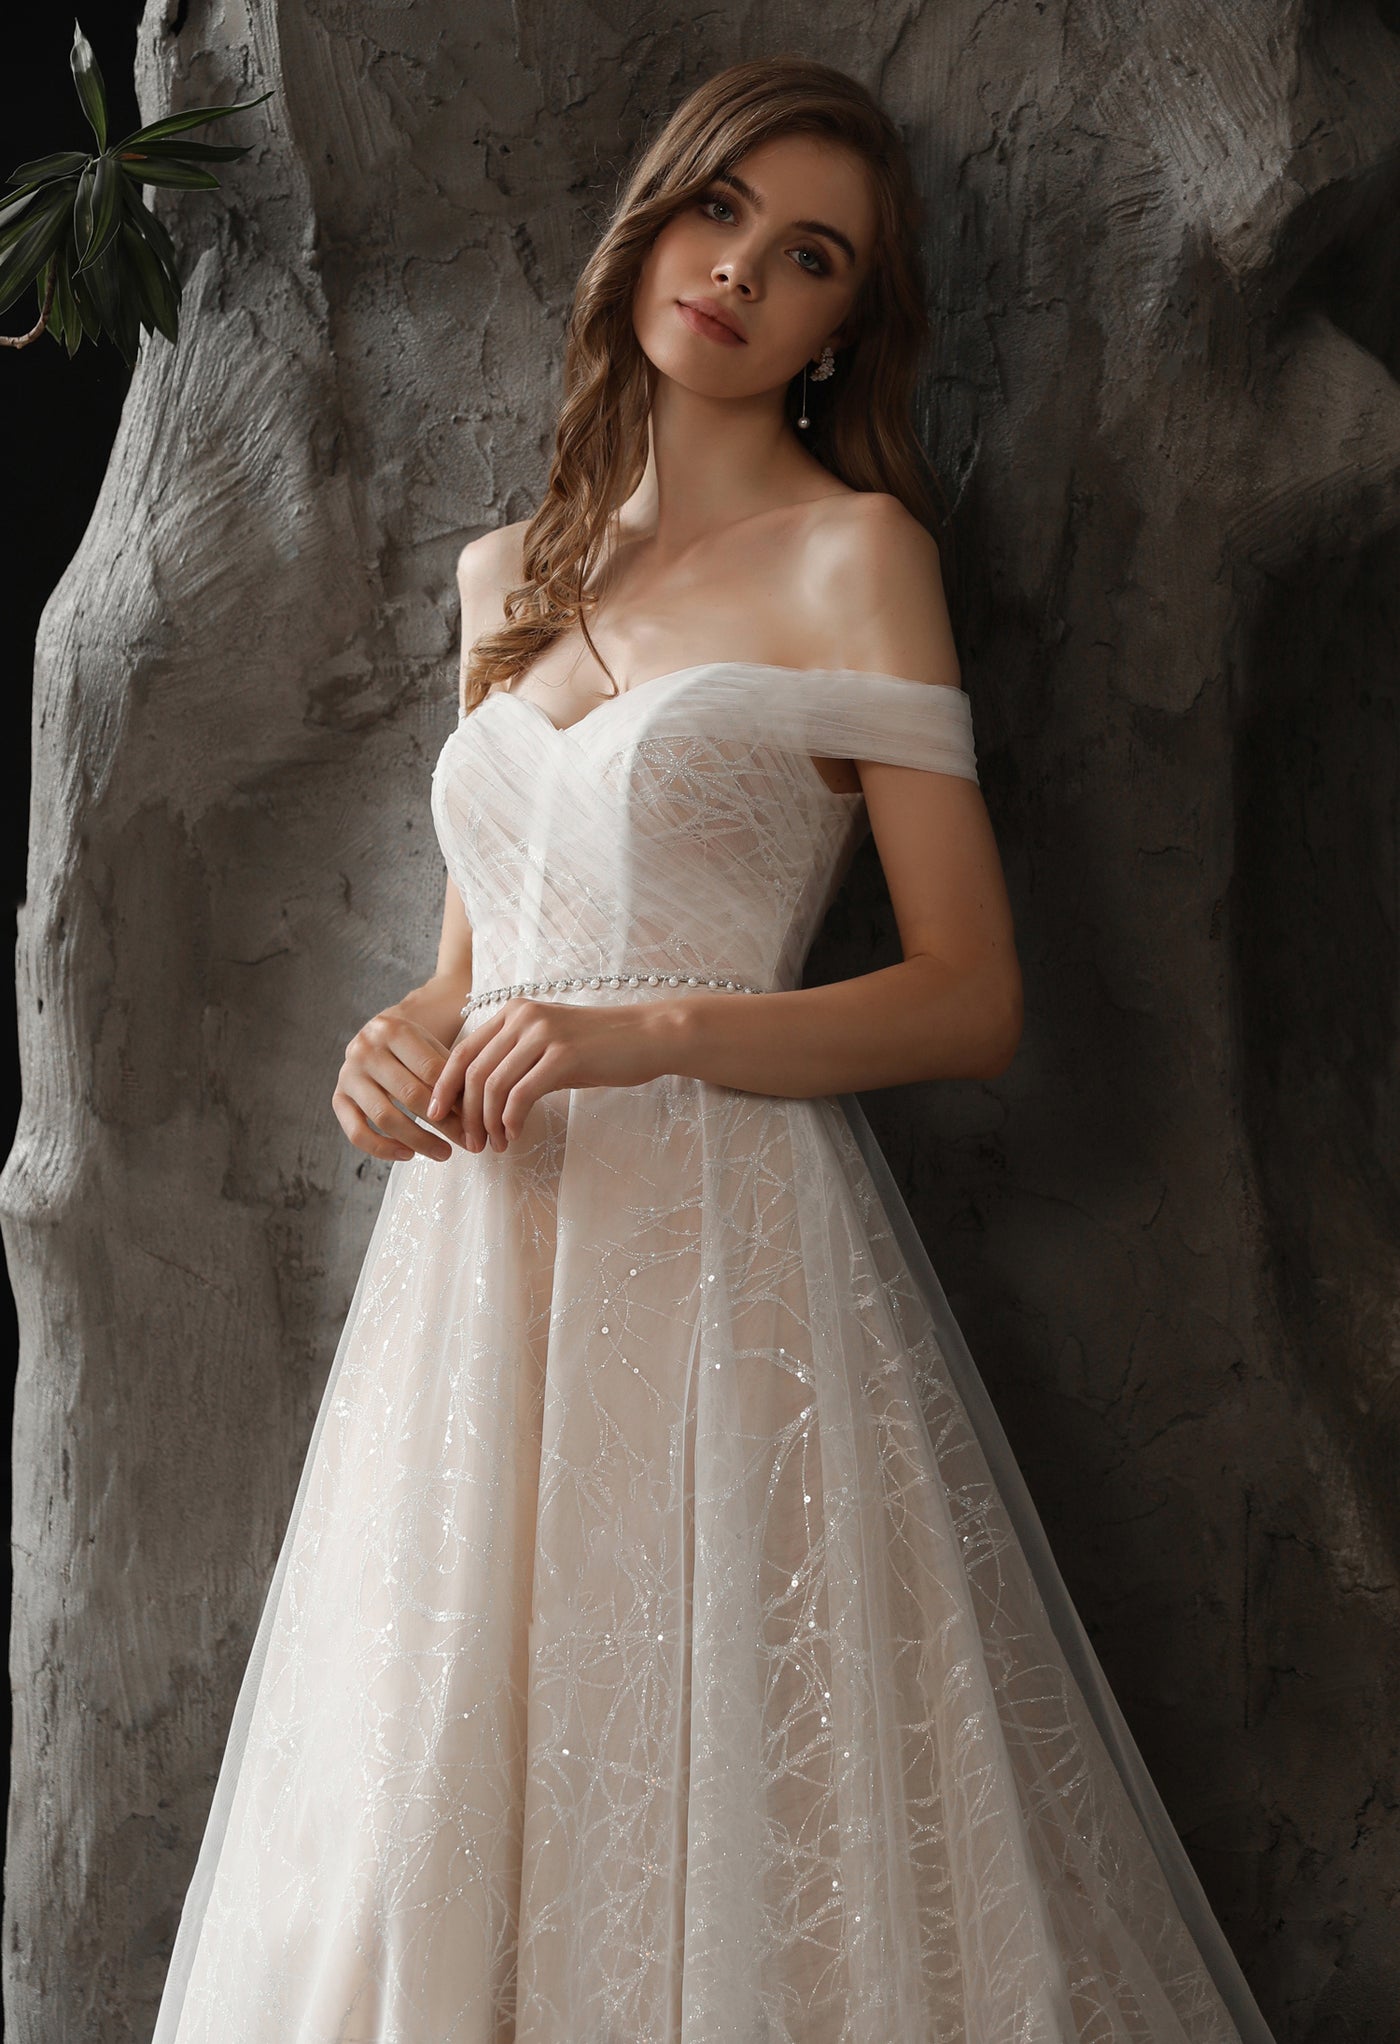 A woman in a Shimmer Off-the-shoulder Neckline A-line Tulle Wedding Dress by Bergamot Bridal posing in front of a stone wall at a bridal shop.